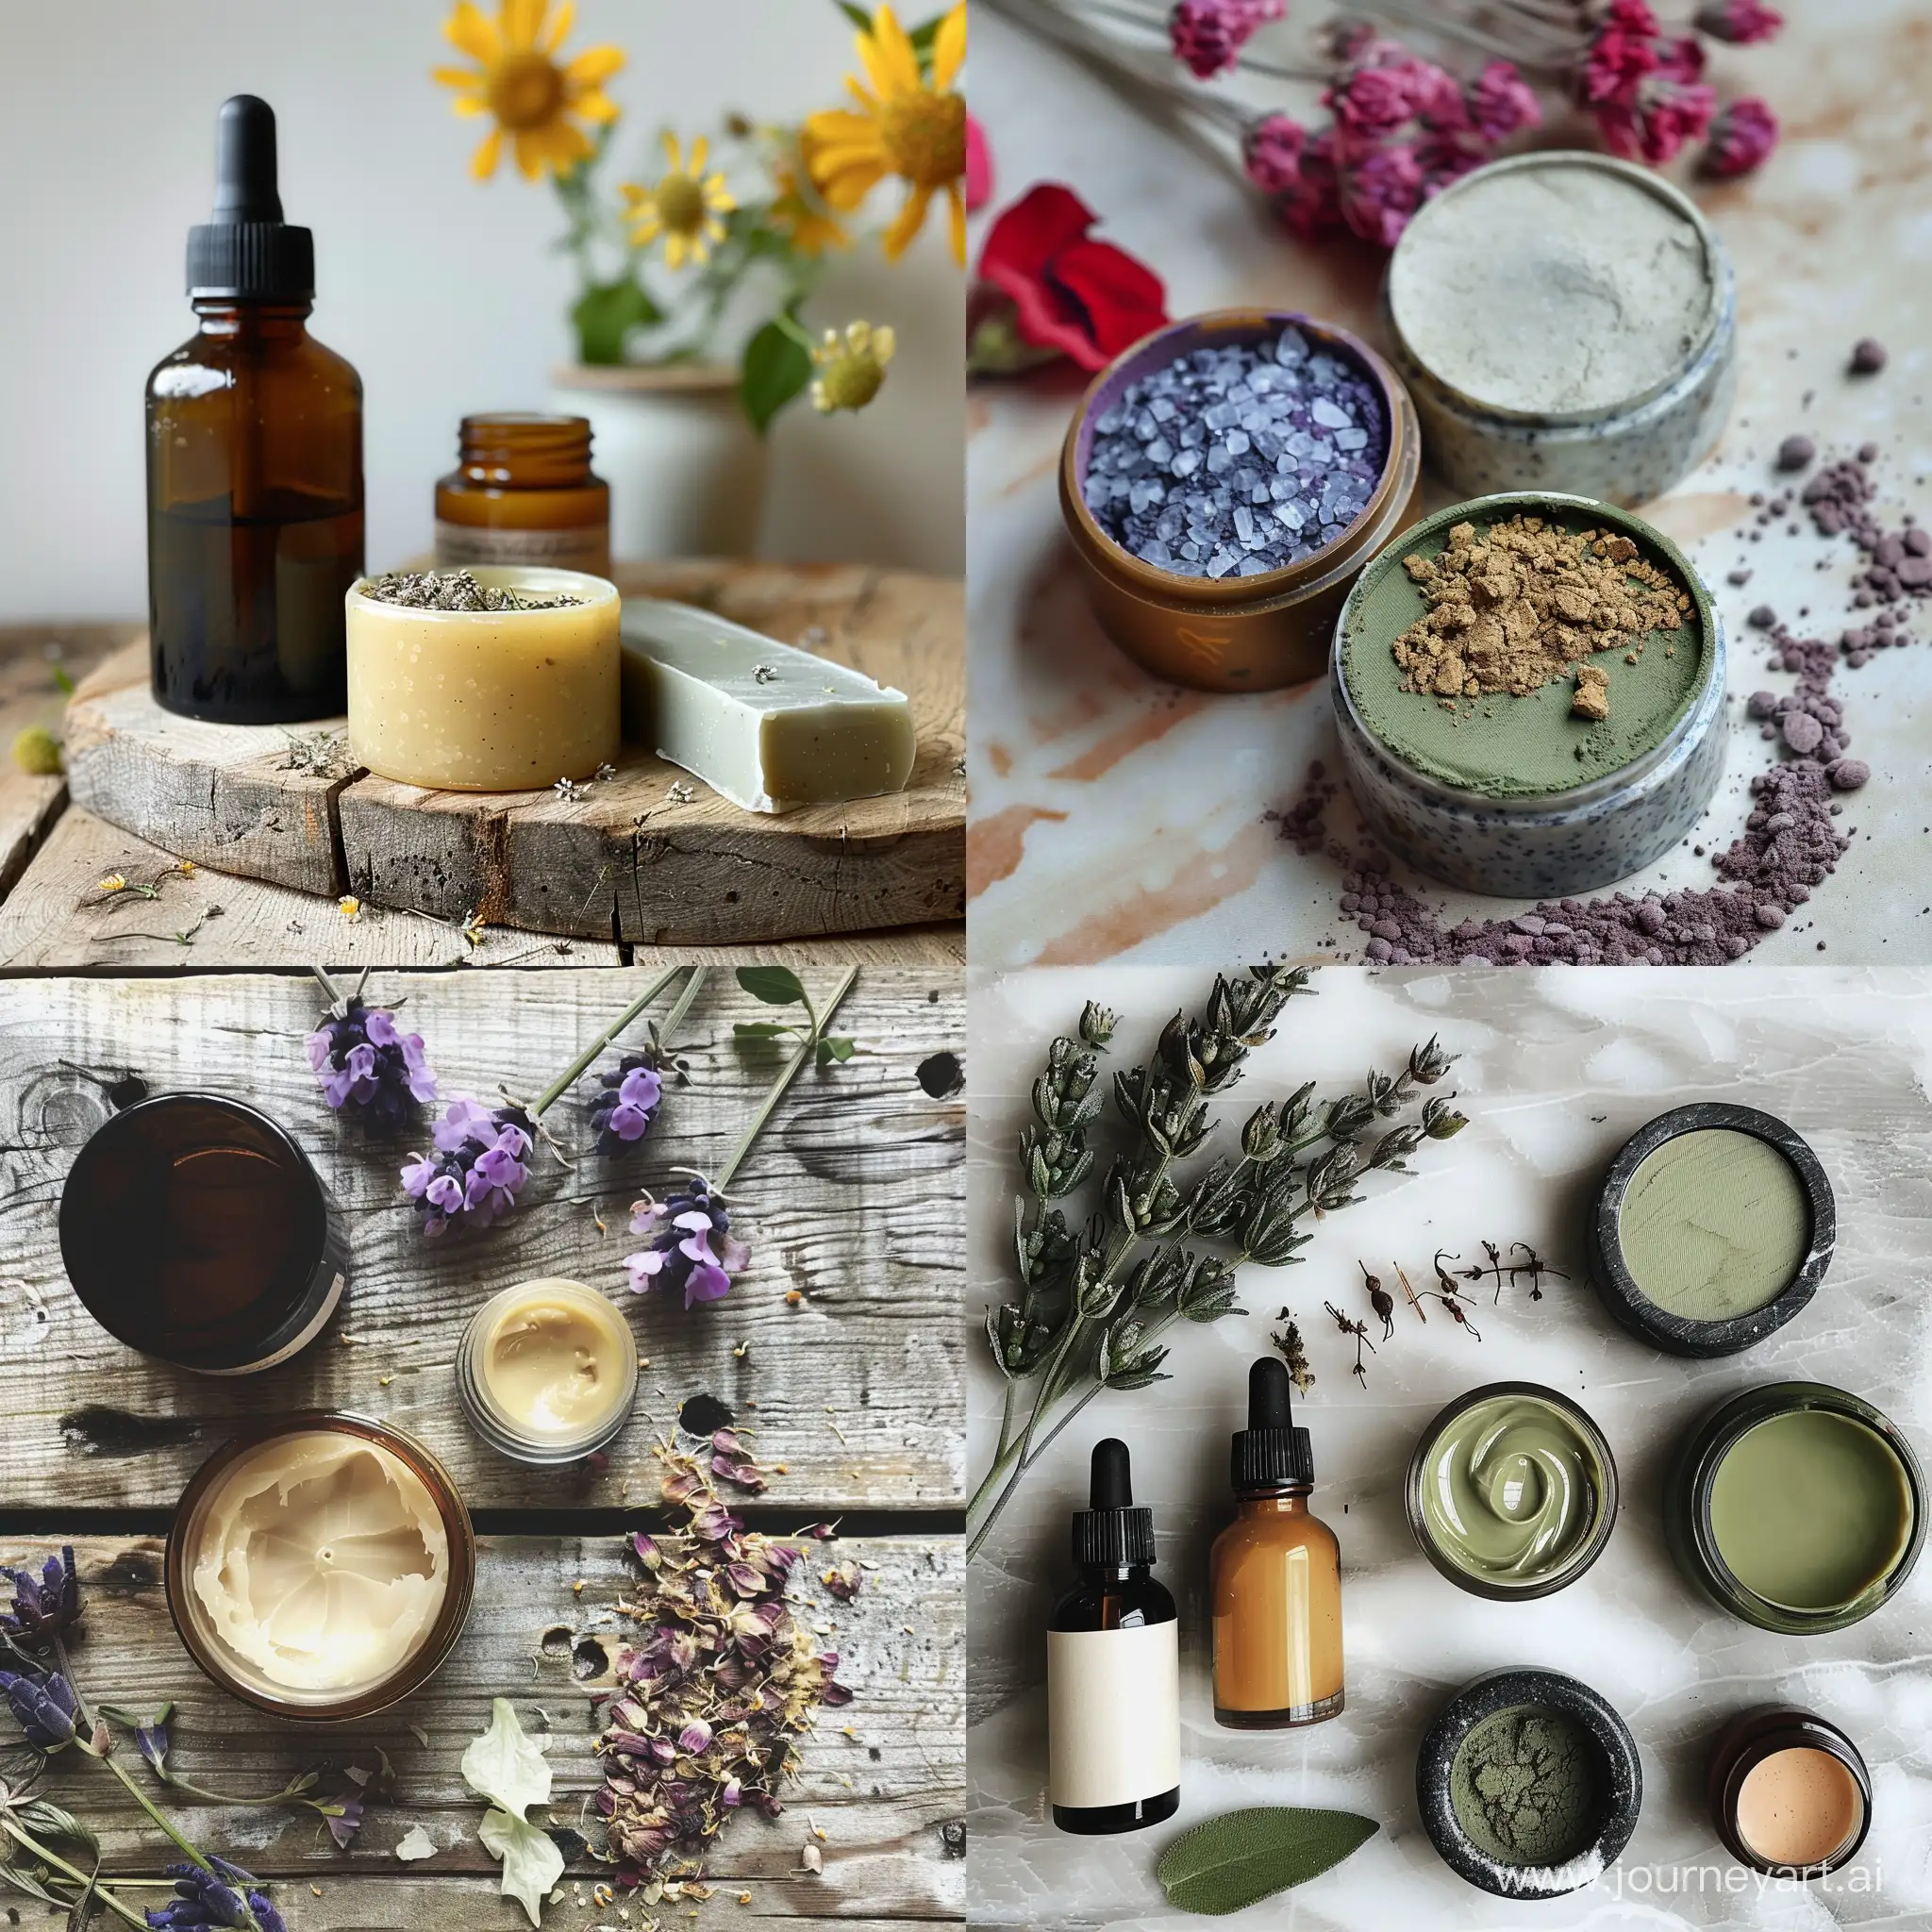 Handmade-Natural-Cosmetics-Vibrant-Palette-and-Array-of-Products